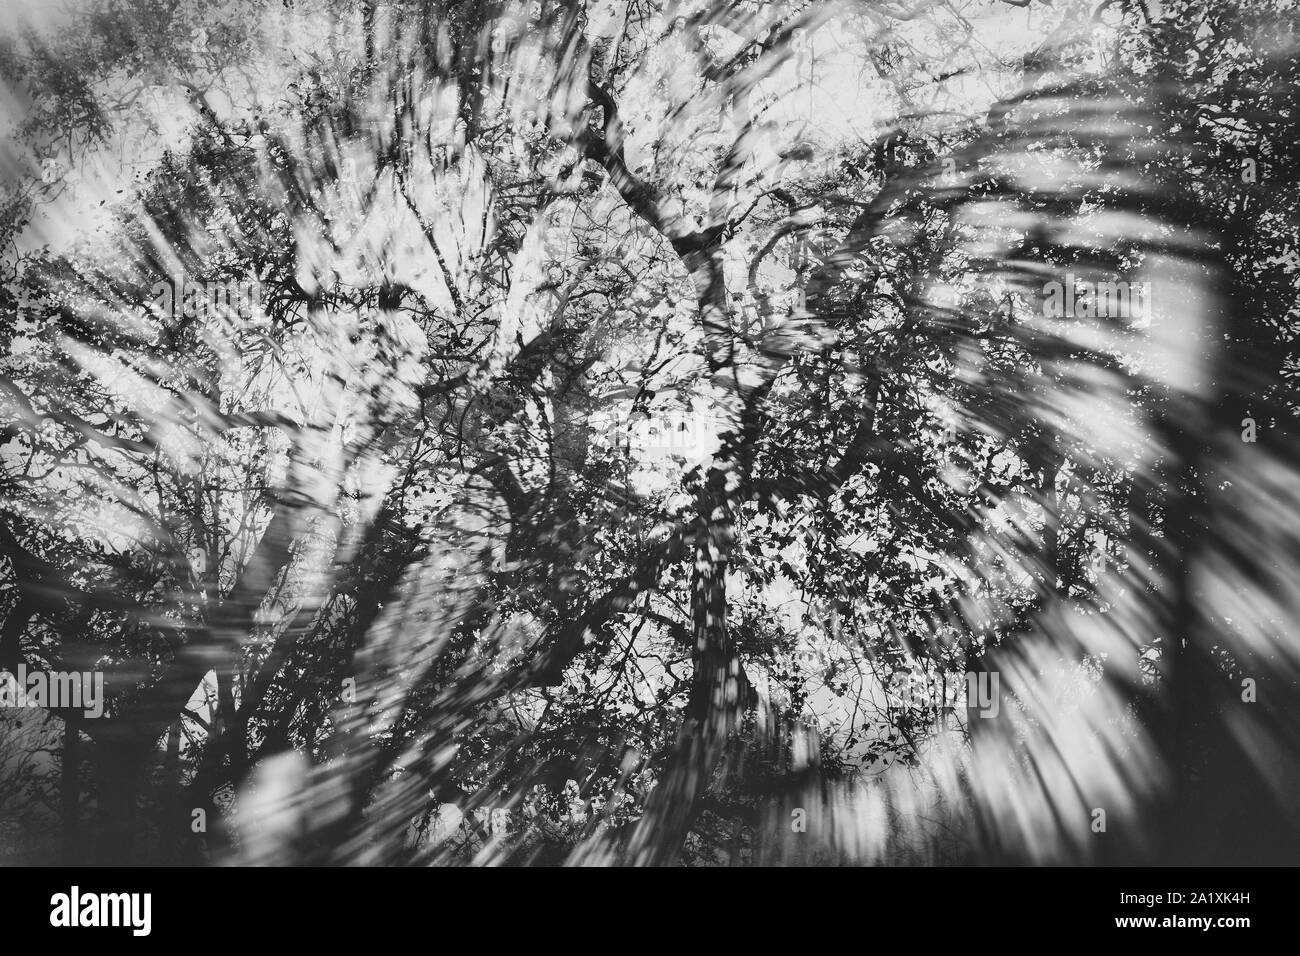 Blur background forest Black and White Stock Photos & Images - Alamy